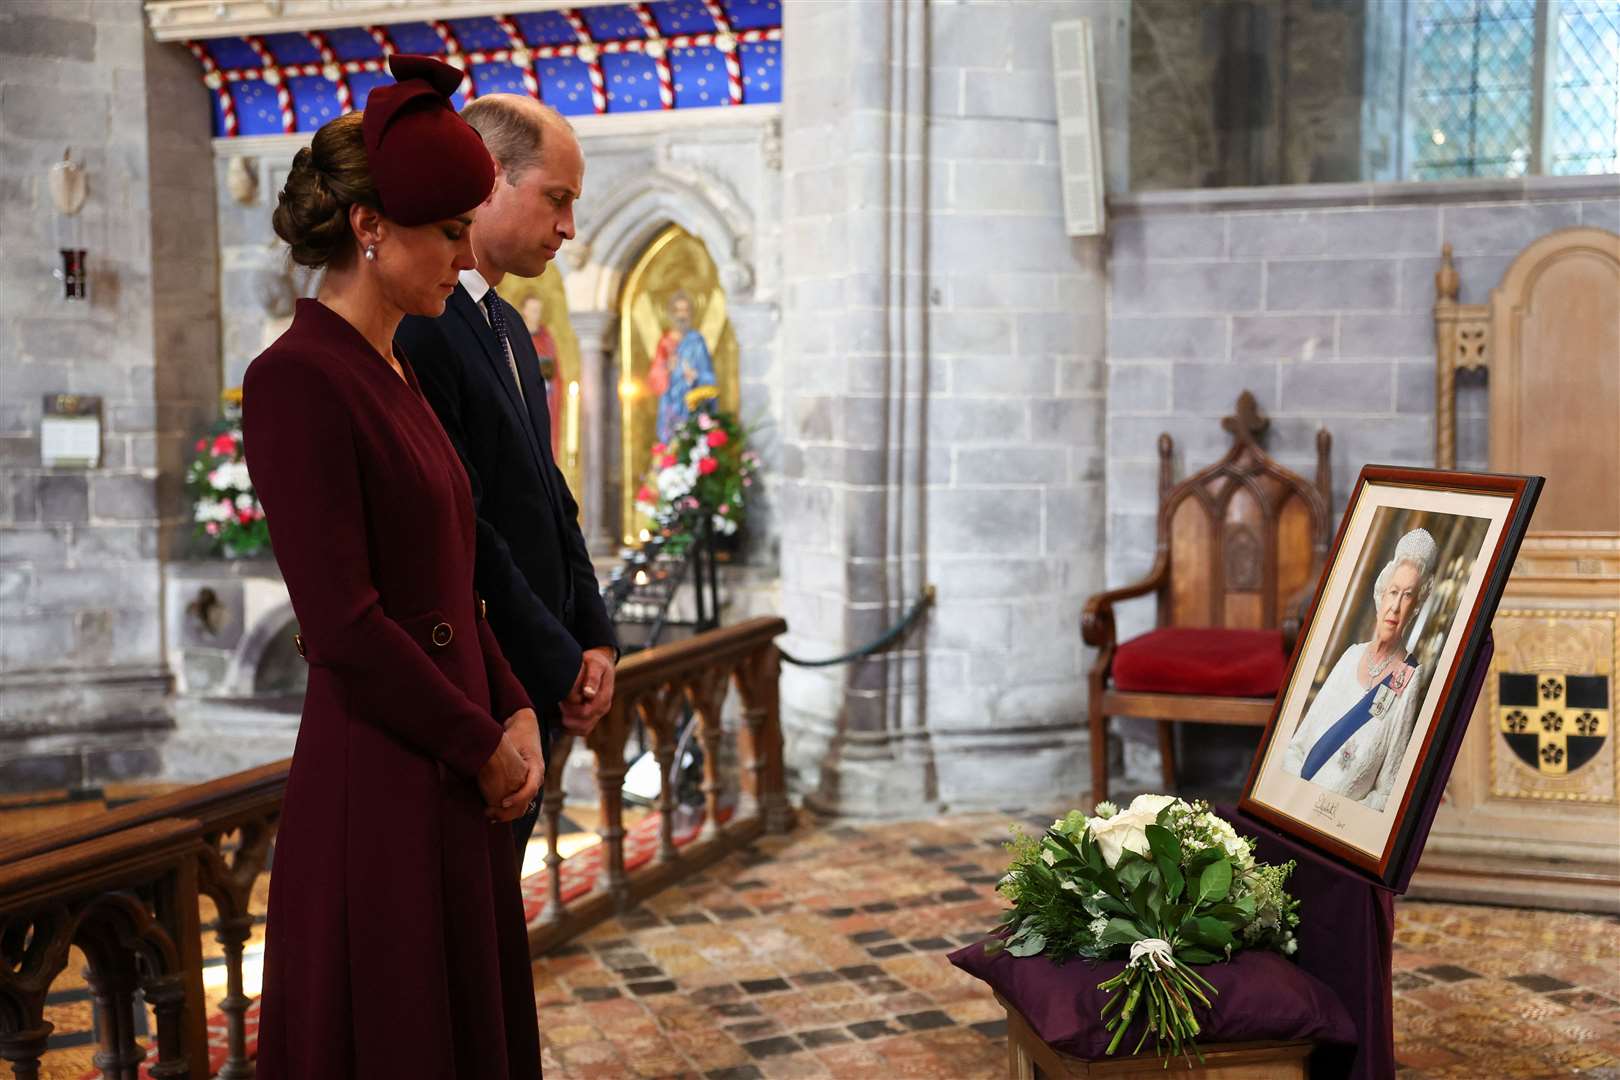 The Prince and Princess of Wales attend a service at St Davids Cathedral, Haverfordwest, Pembrokeshire, West Wales (Toby Melville/PA)